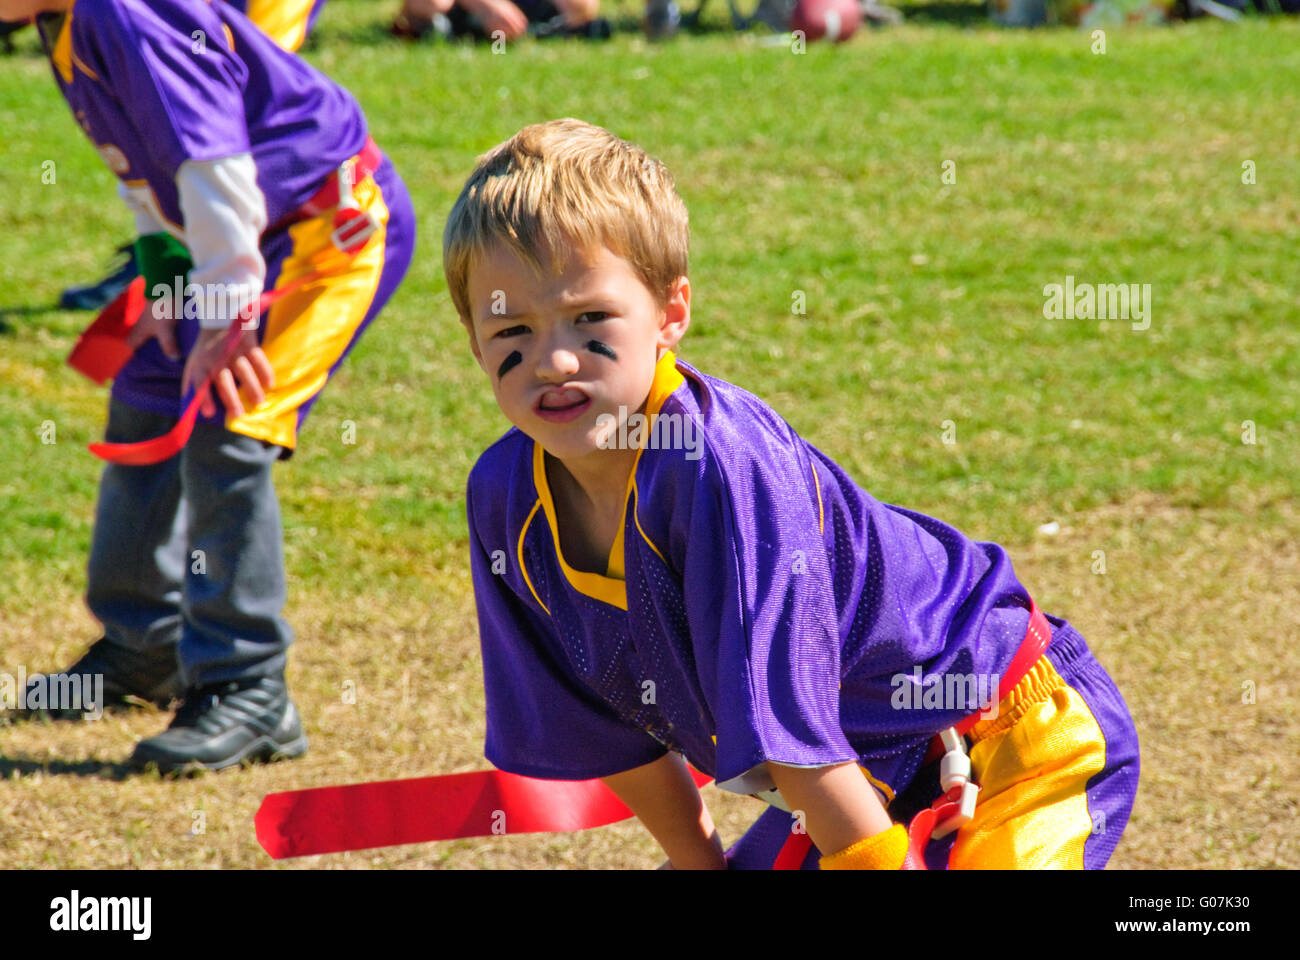 Youth flag football player Stock Photo